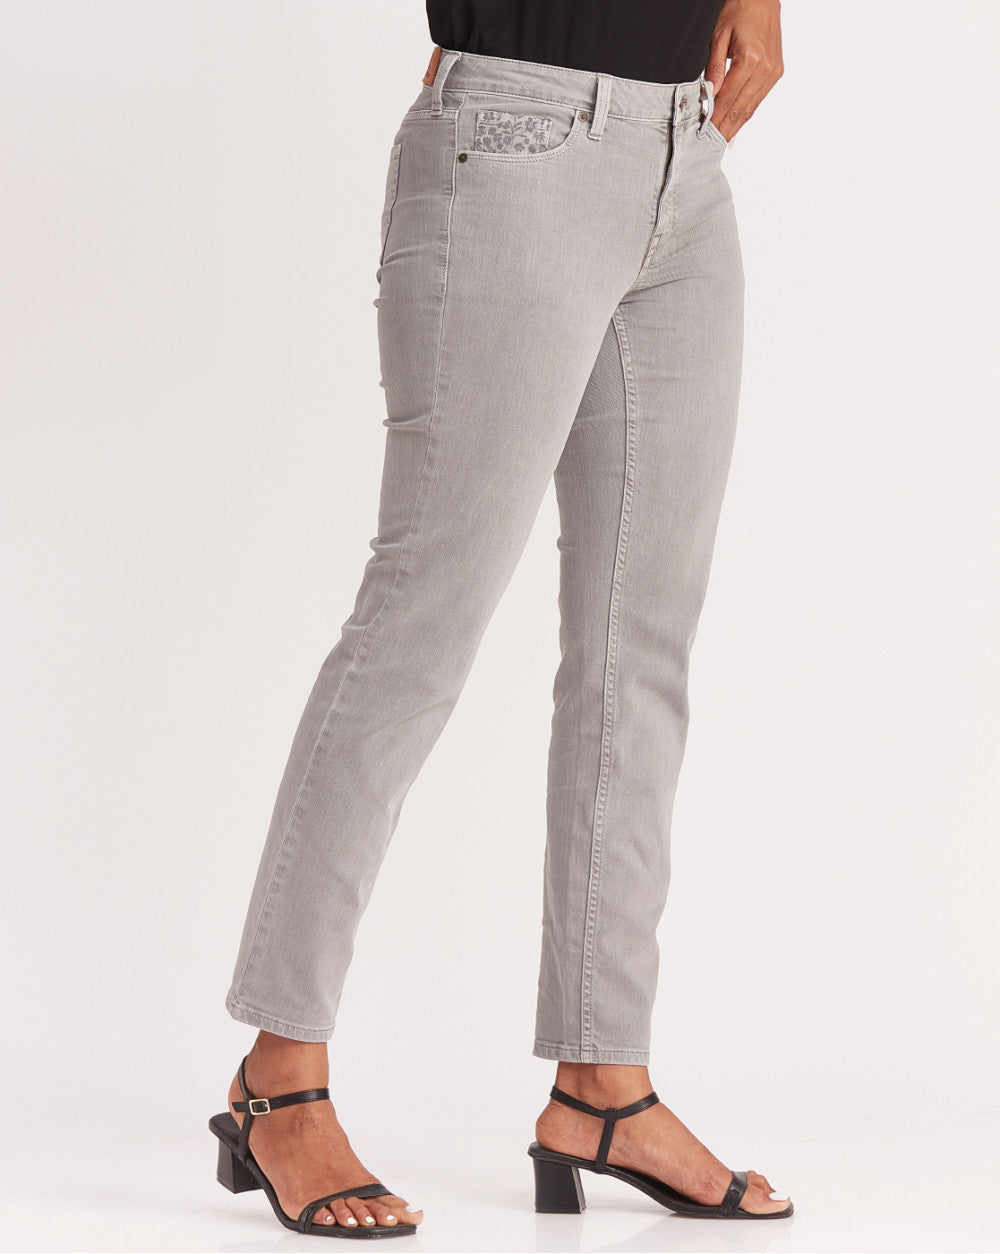 Slim Fit Mid Waist Colored Jeans - Soft Grey